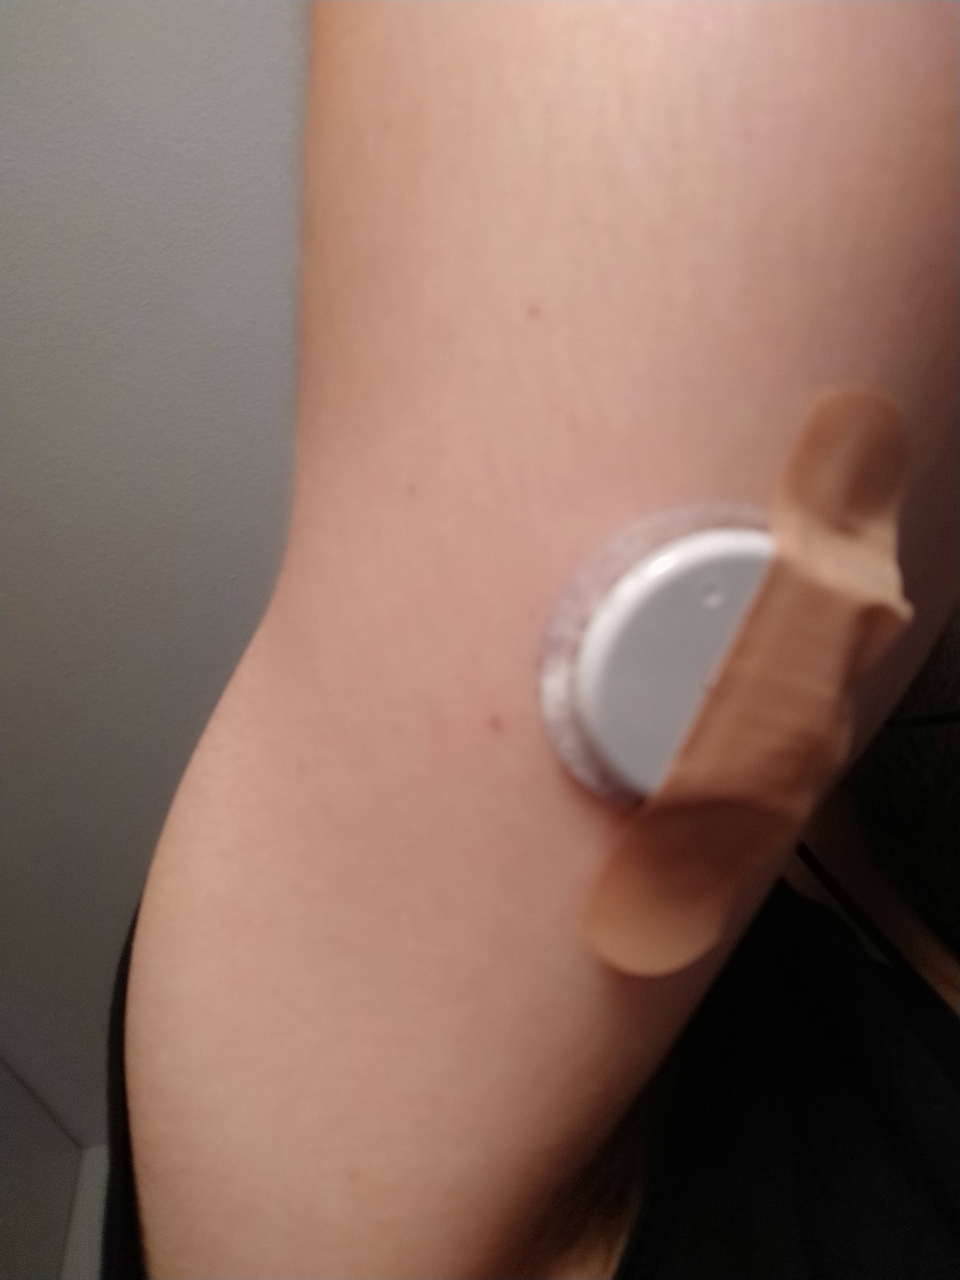 Continous Glucose Monitor shown on arm